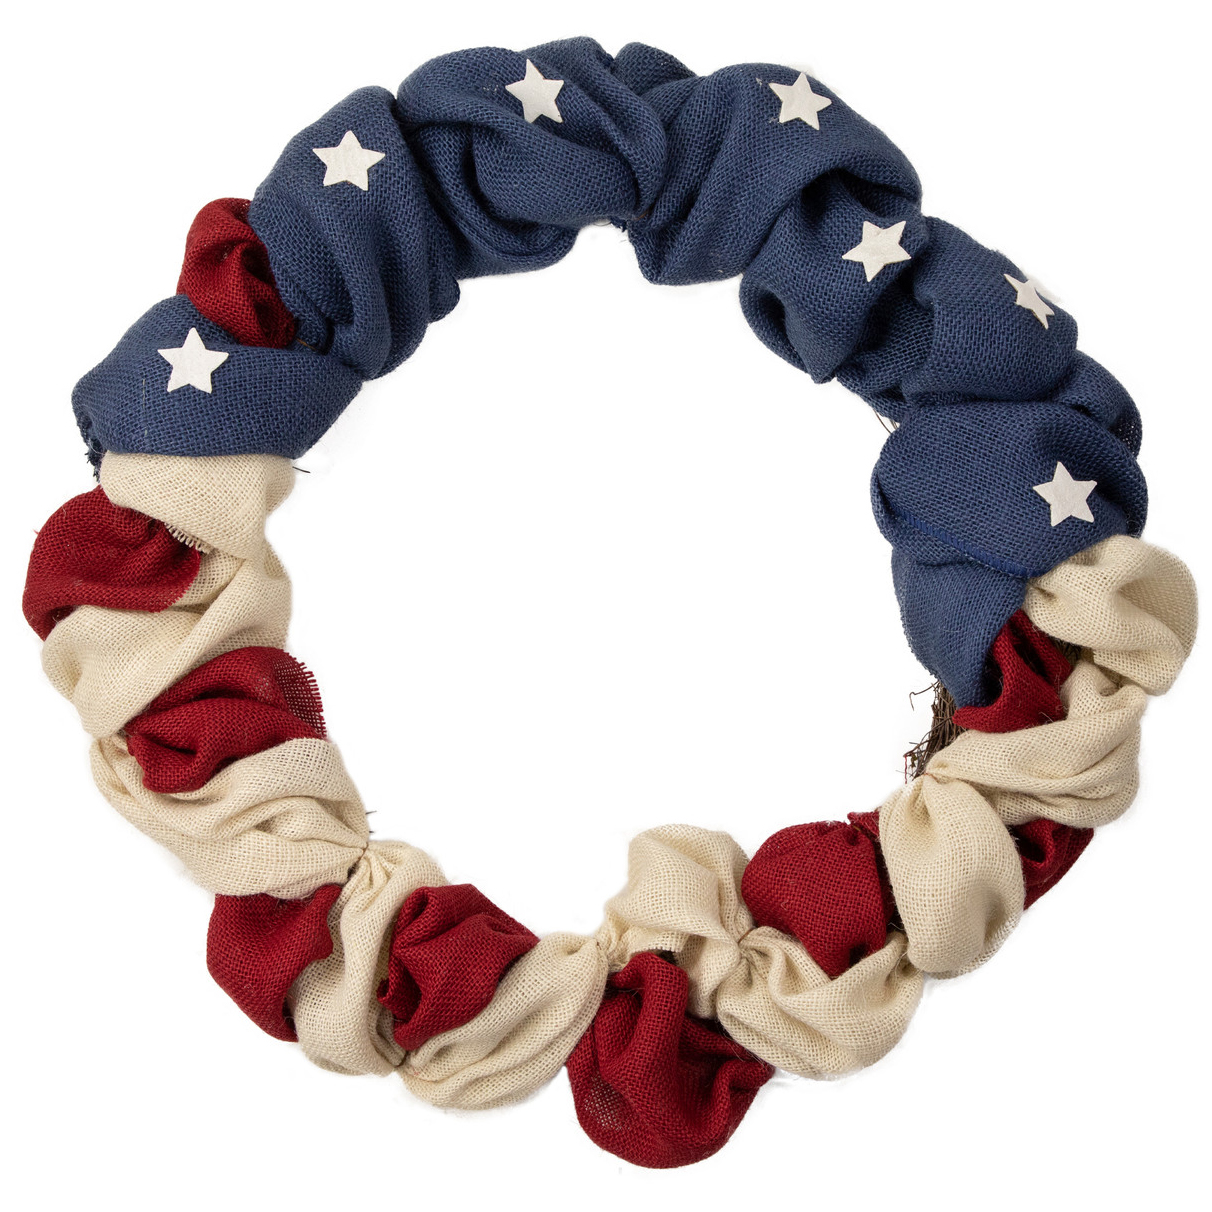 20 inch bunched burlap red, white and blue wreath